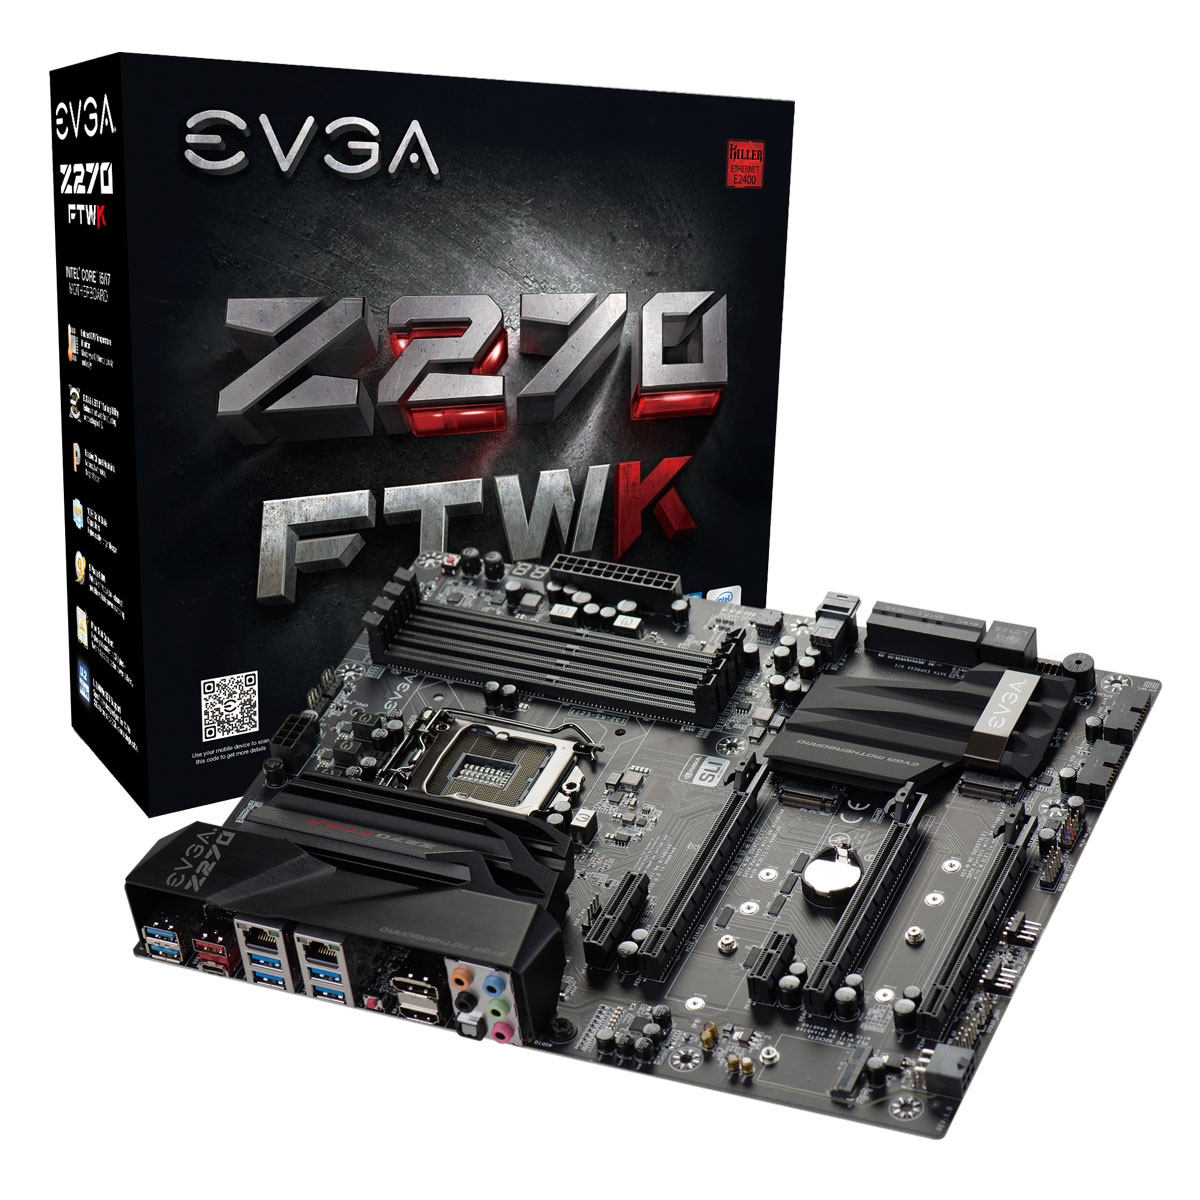 EVGA Z270 Classified K - Motherboard Specifications On MotherboardDB